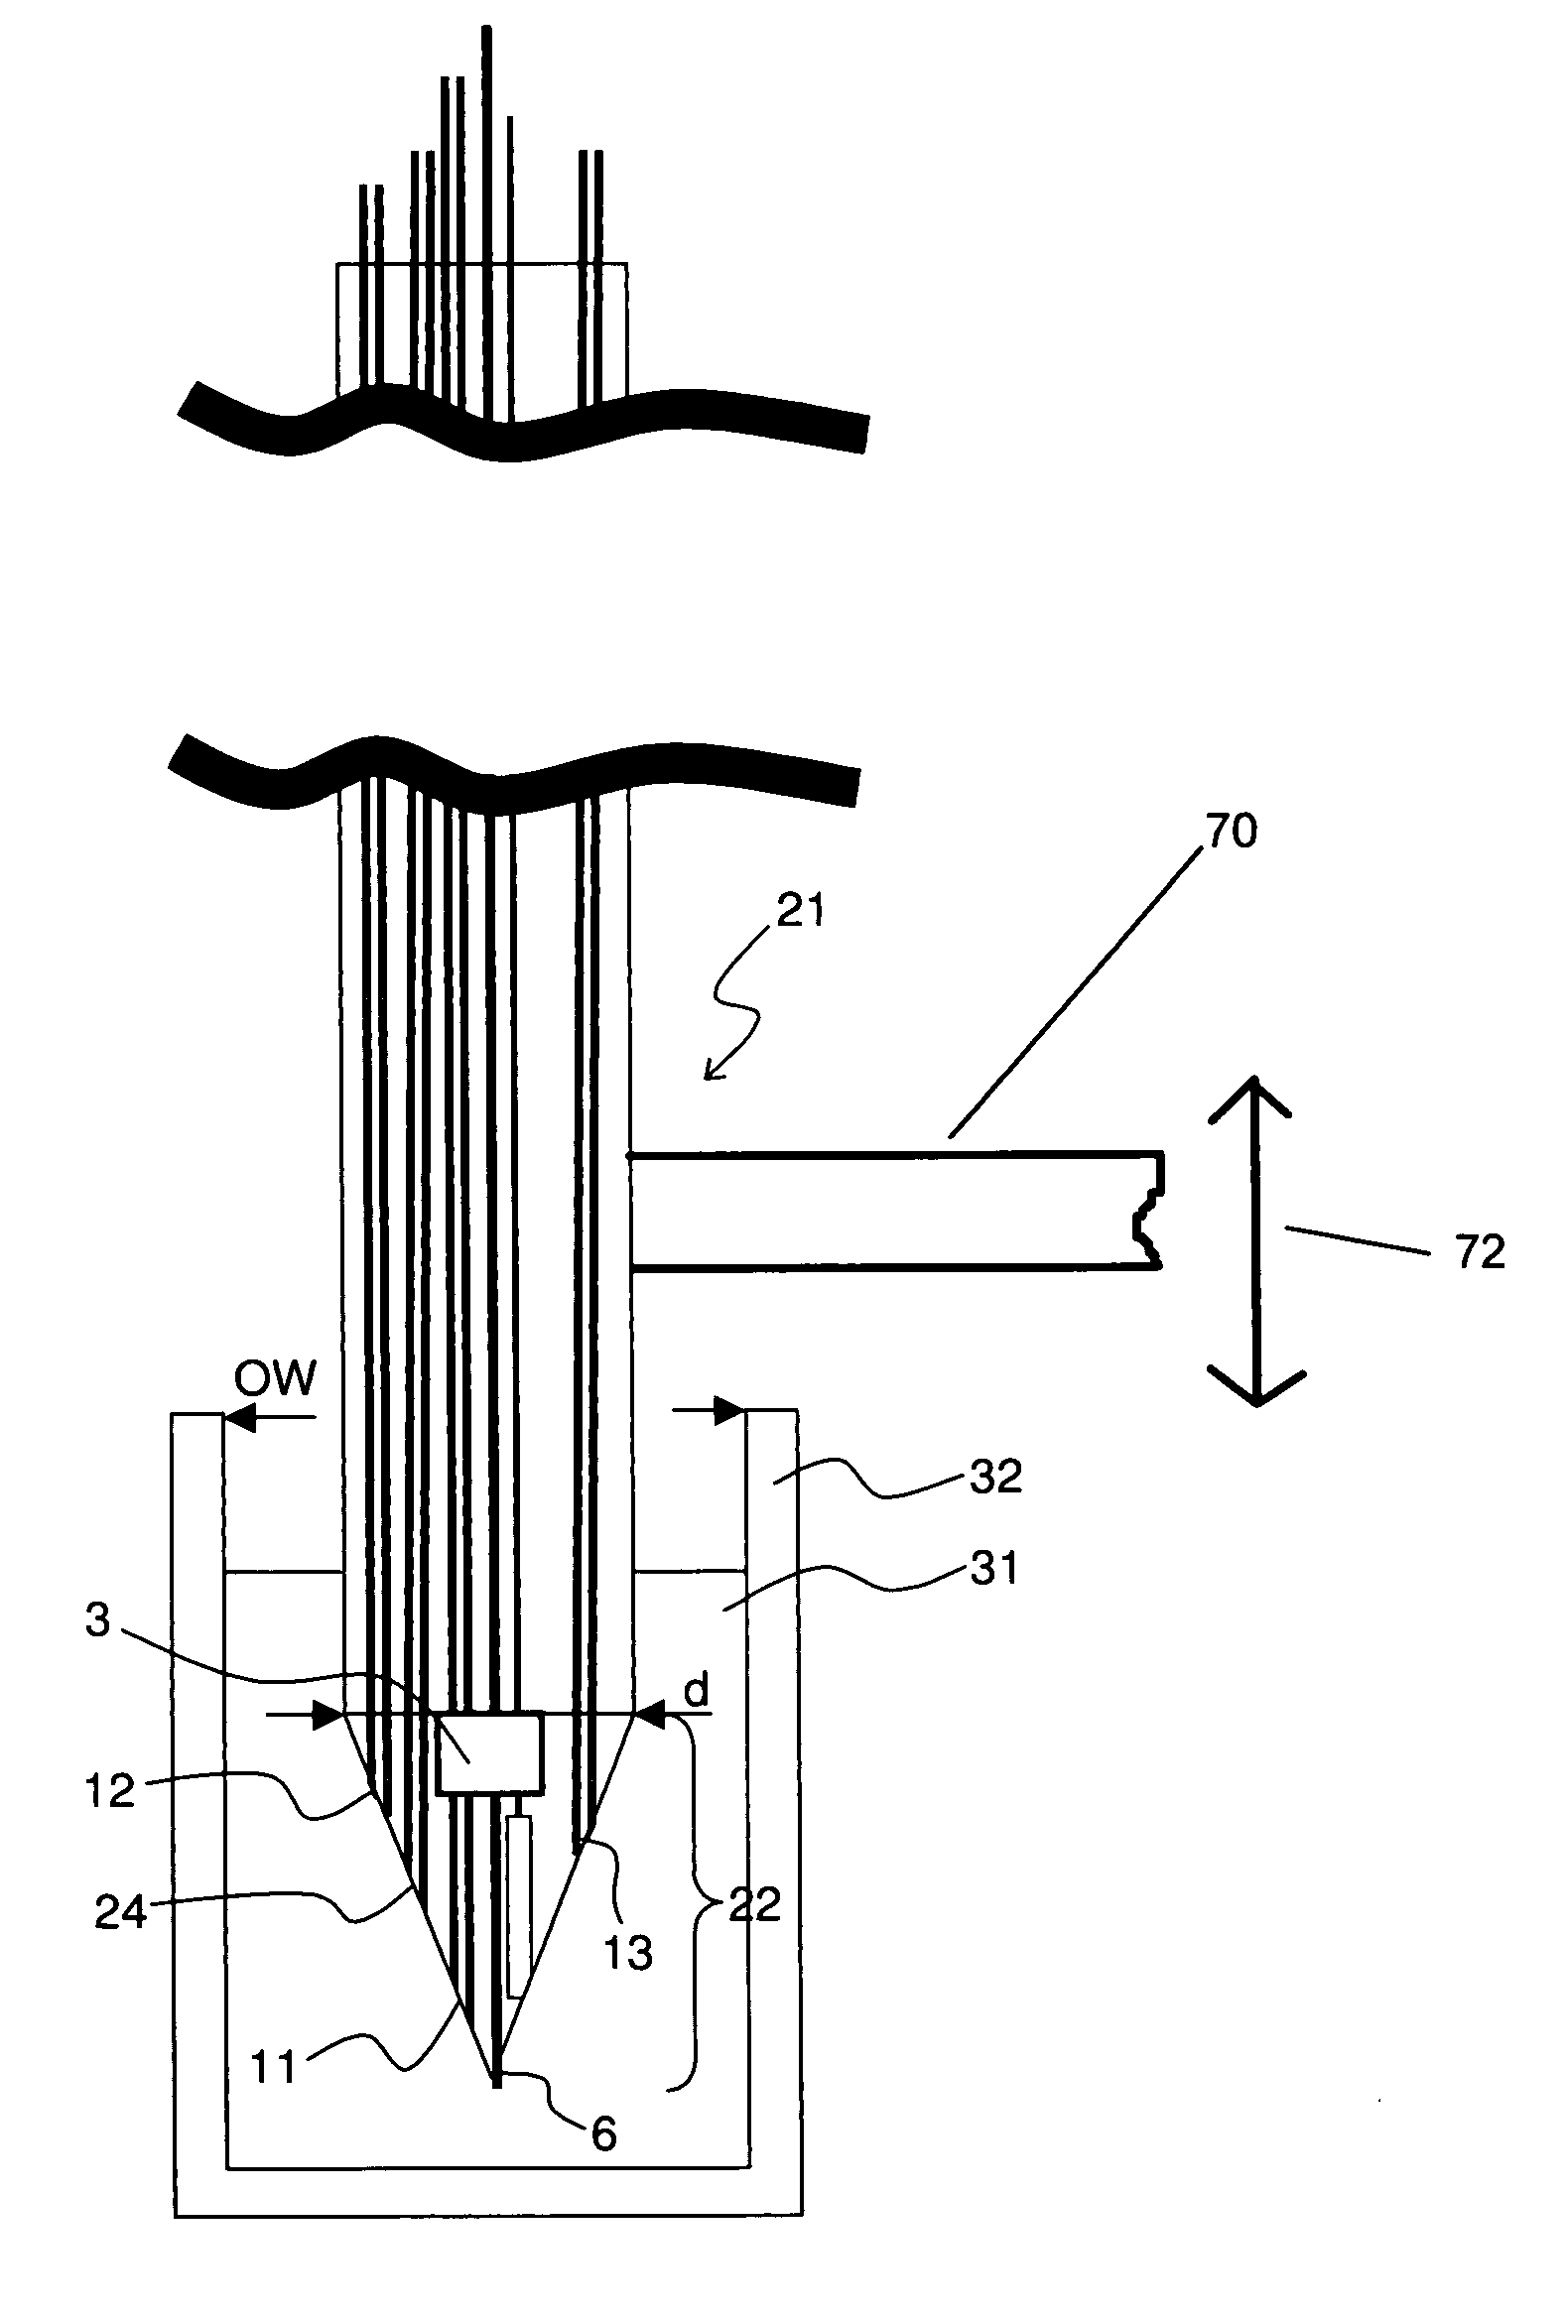 Method and device for the preparation of liquid samples in NMR spectroscopy using a combined titration and pH electrode